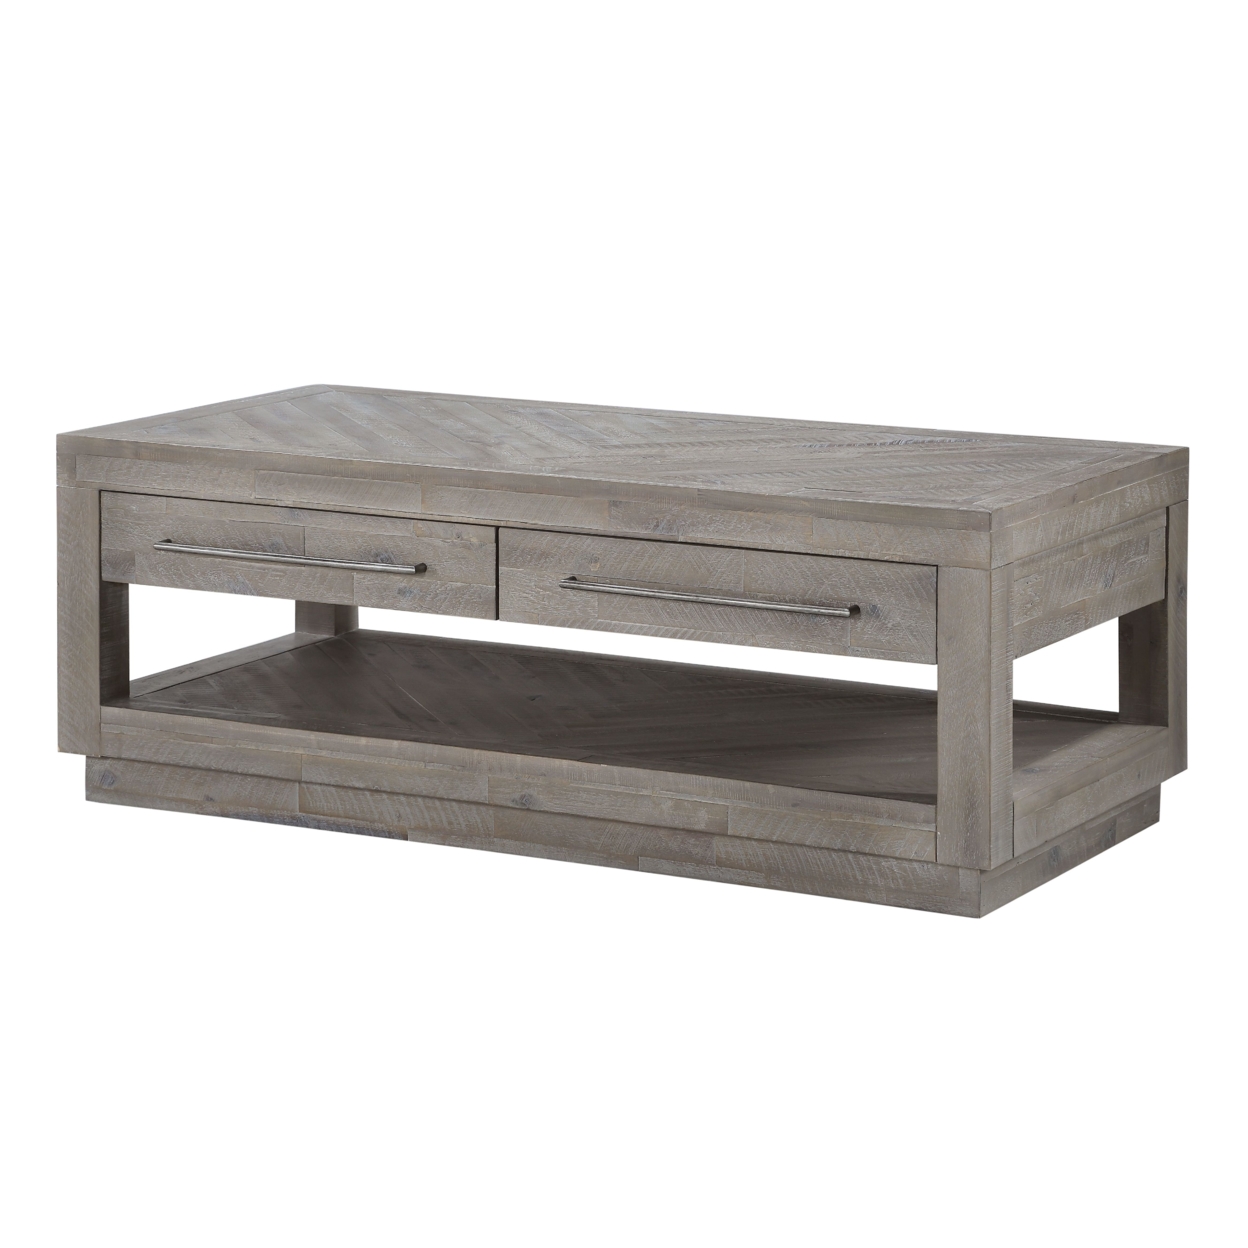 Two Drawer And One Bottom Shelf Coffee Table With Metal Handle Pull, Rustic Latte Gray- Saltoro Sherpi